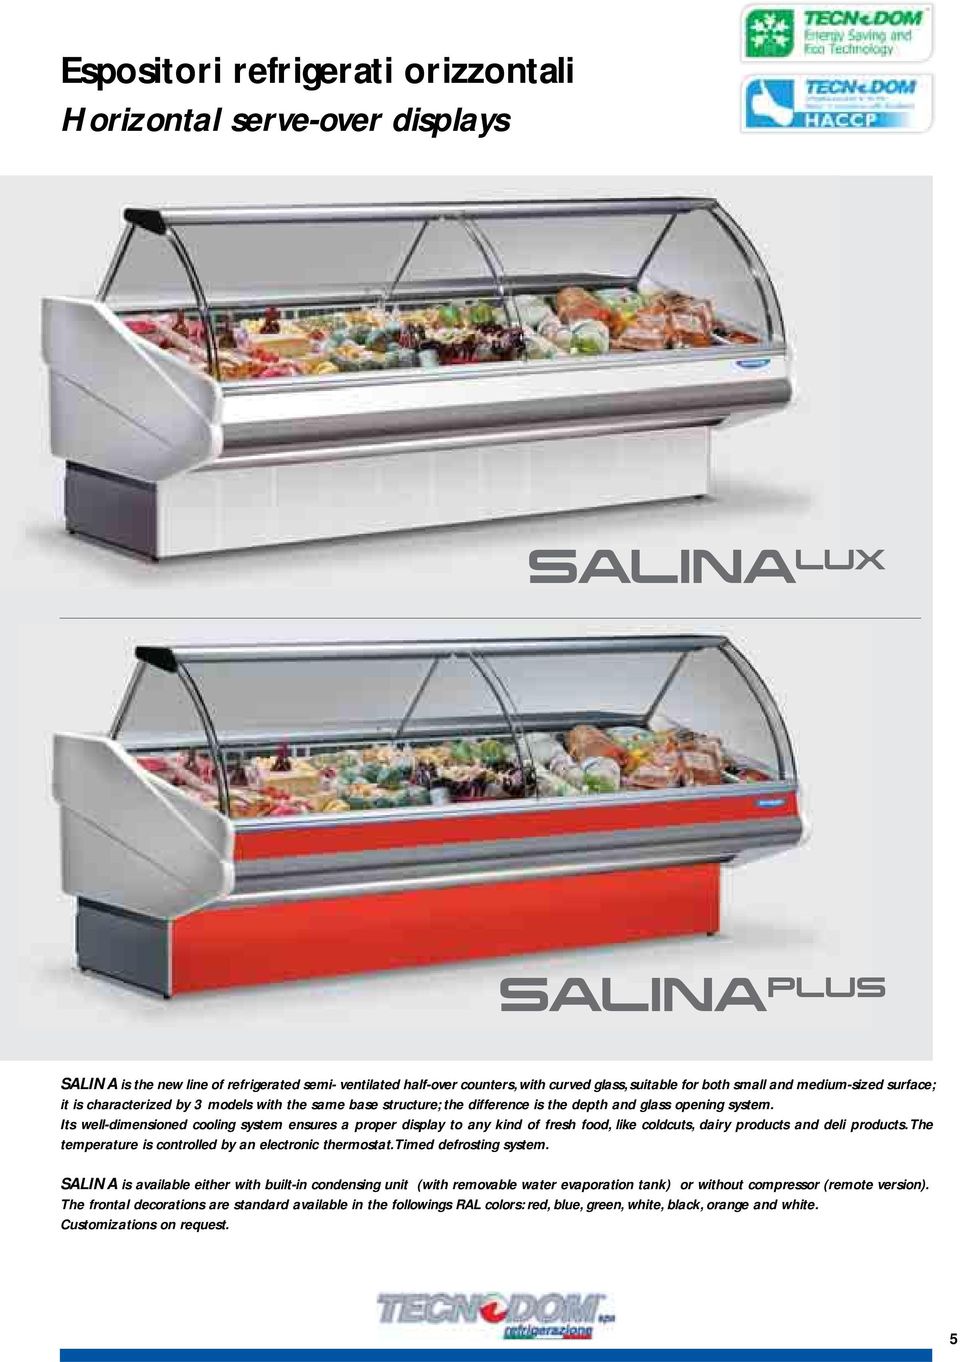 Its well-dimensioned cooling system ensures a proper display to any kind of fresh food, like coldcuts, dairy products and deli products. The temperature is controlled by an electronic thermostat.